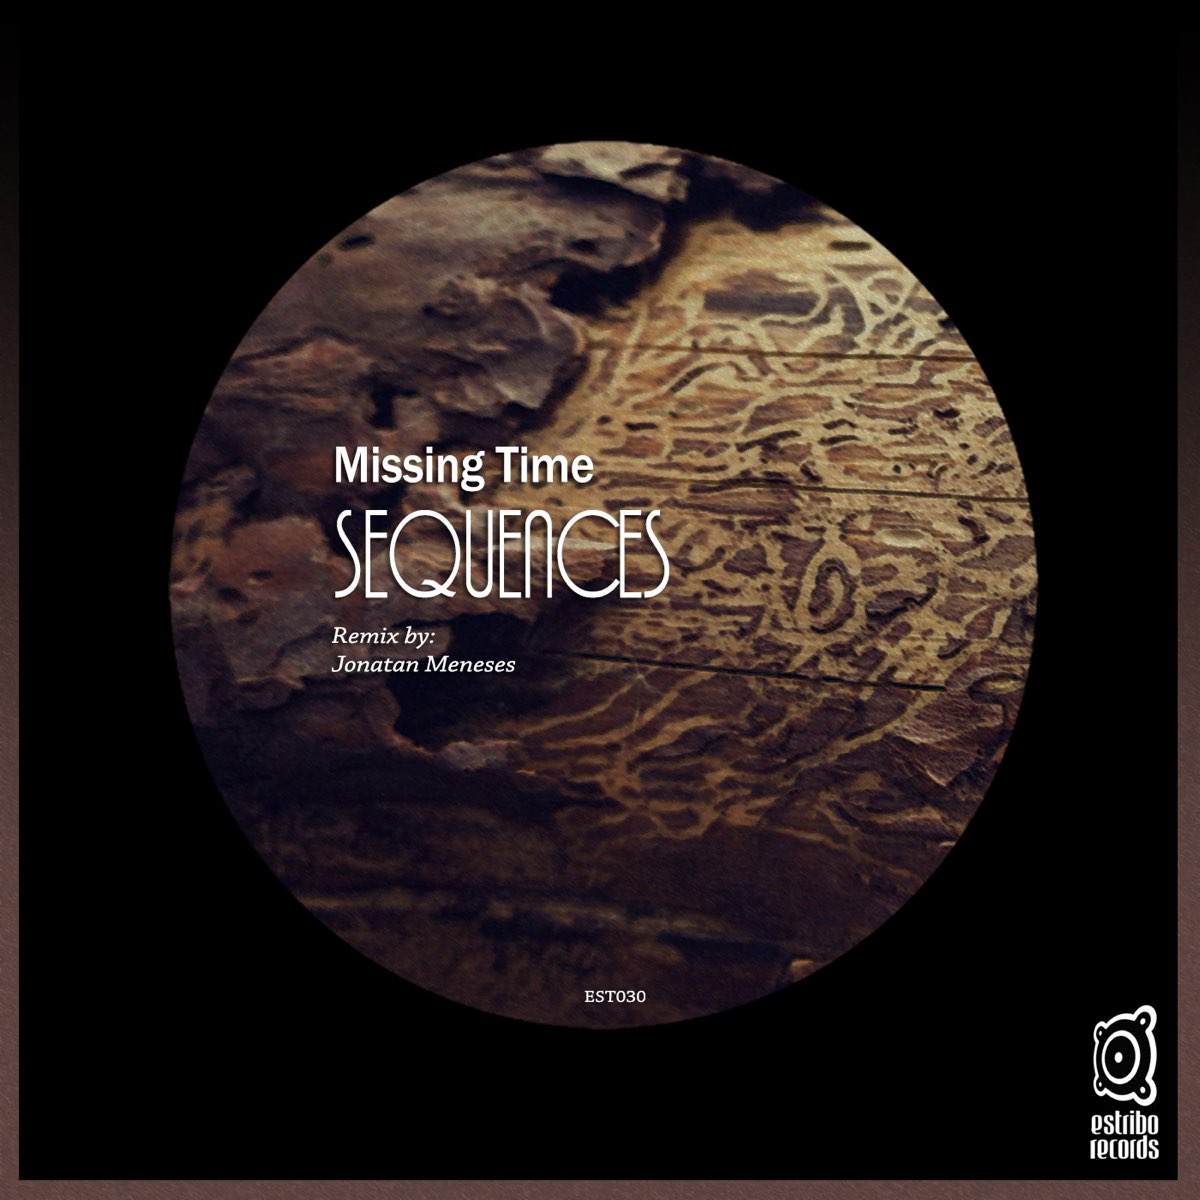 Missing time. Absent time. Time Sequencers. Sequential one Singles - here we go again Remix. Missing ремикс